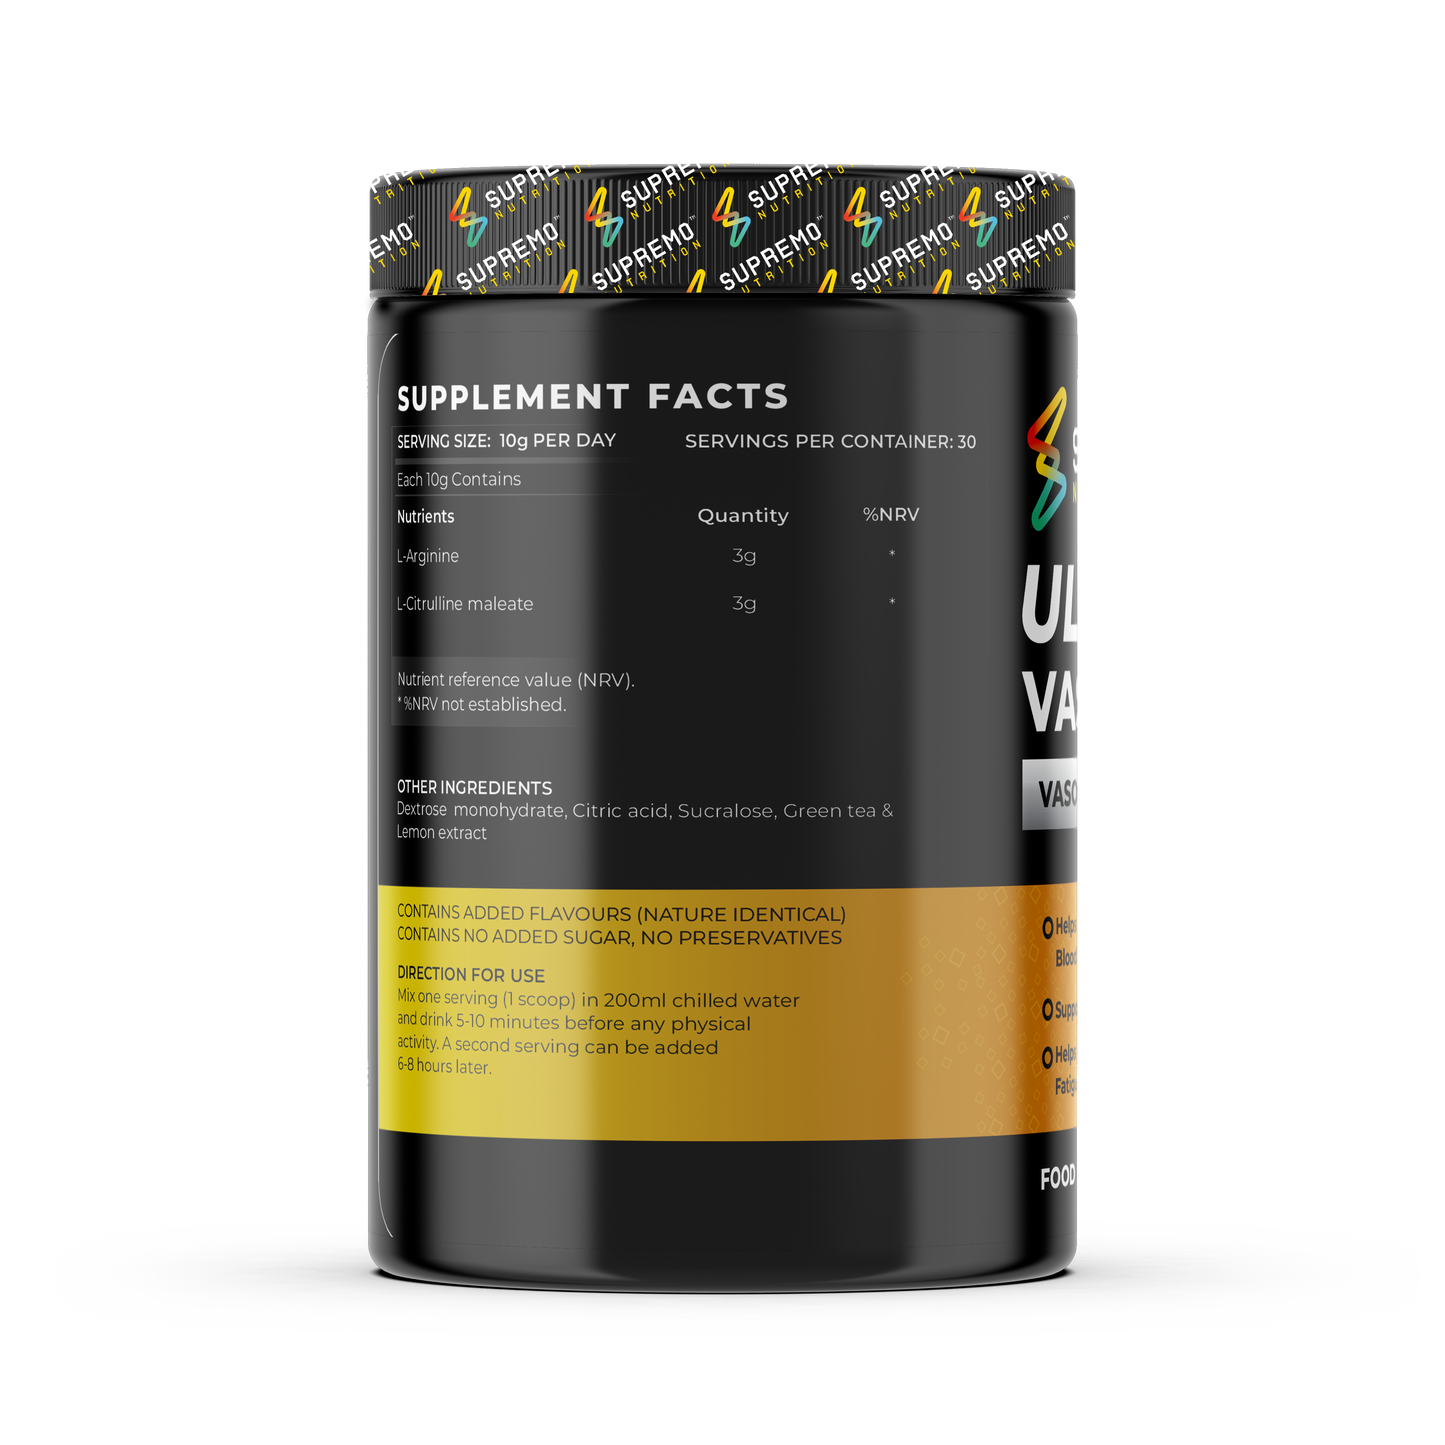 Ultimate Vassomaxx Vasodilation Complex, Helps Dilate Blood Vessels & Increate Blood Flow To The Muscles, Supports Muscle Growth And Recovery, Helps Reduce Muscle Soreness & Fatigue After Exercise